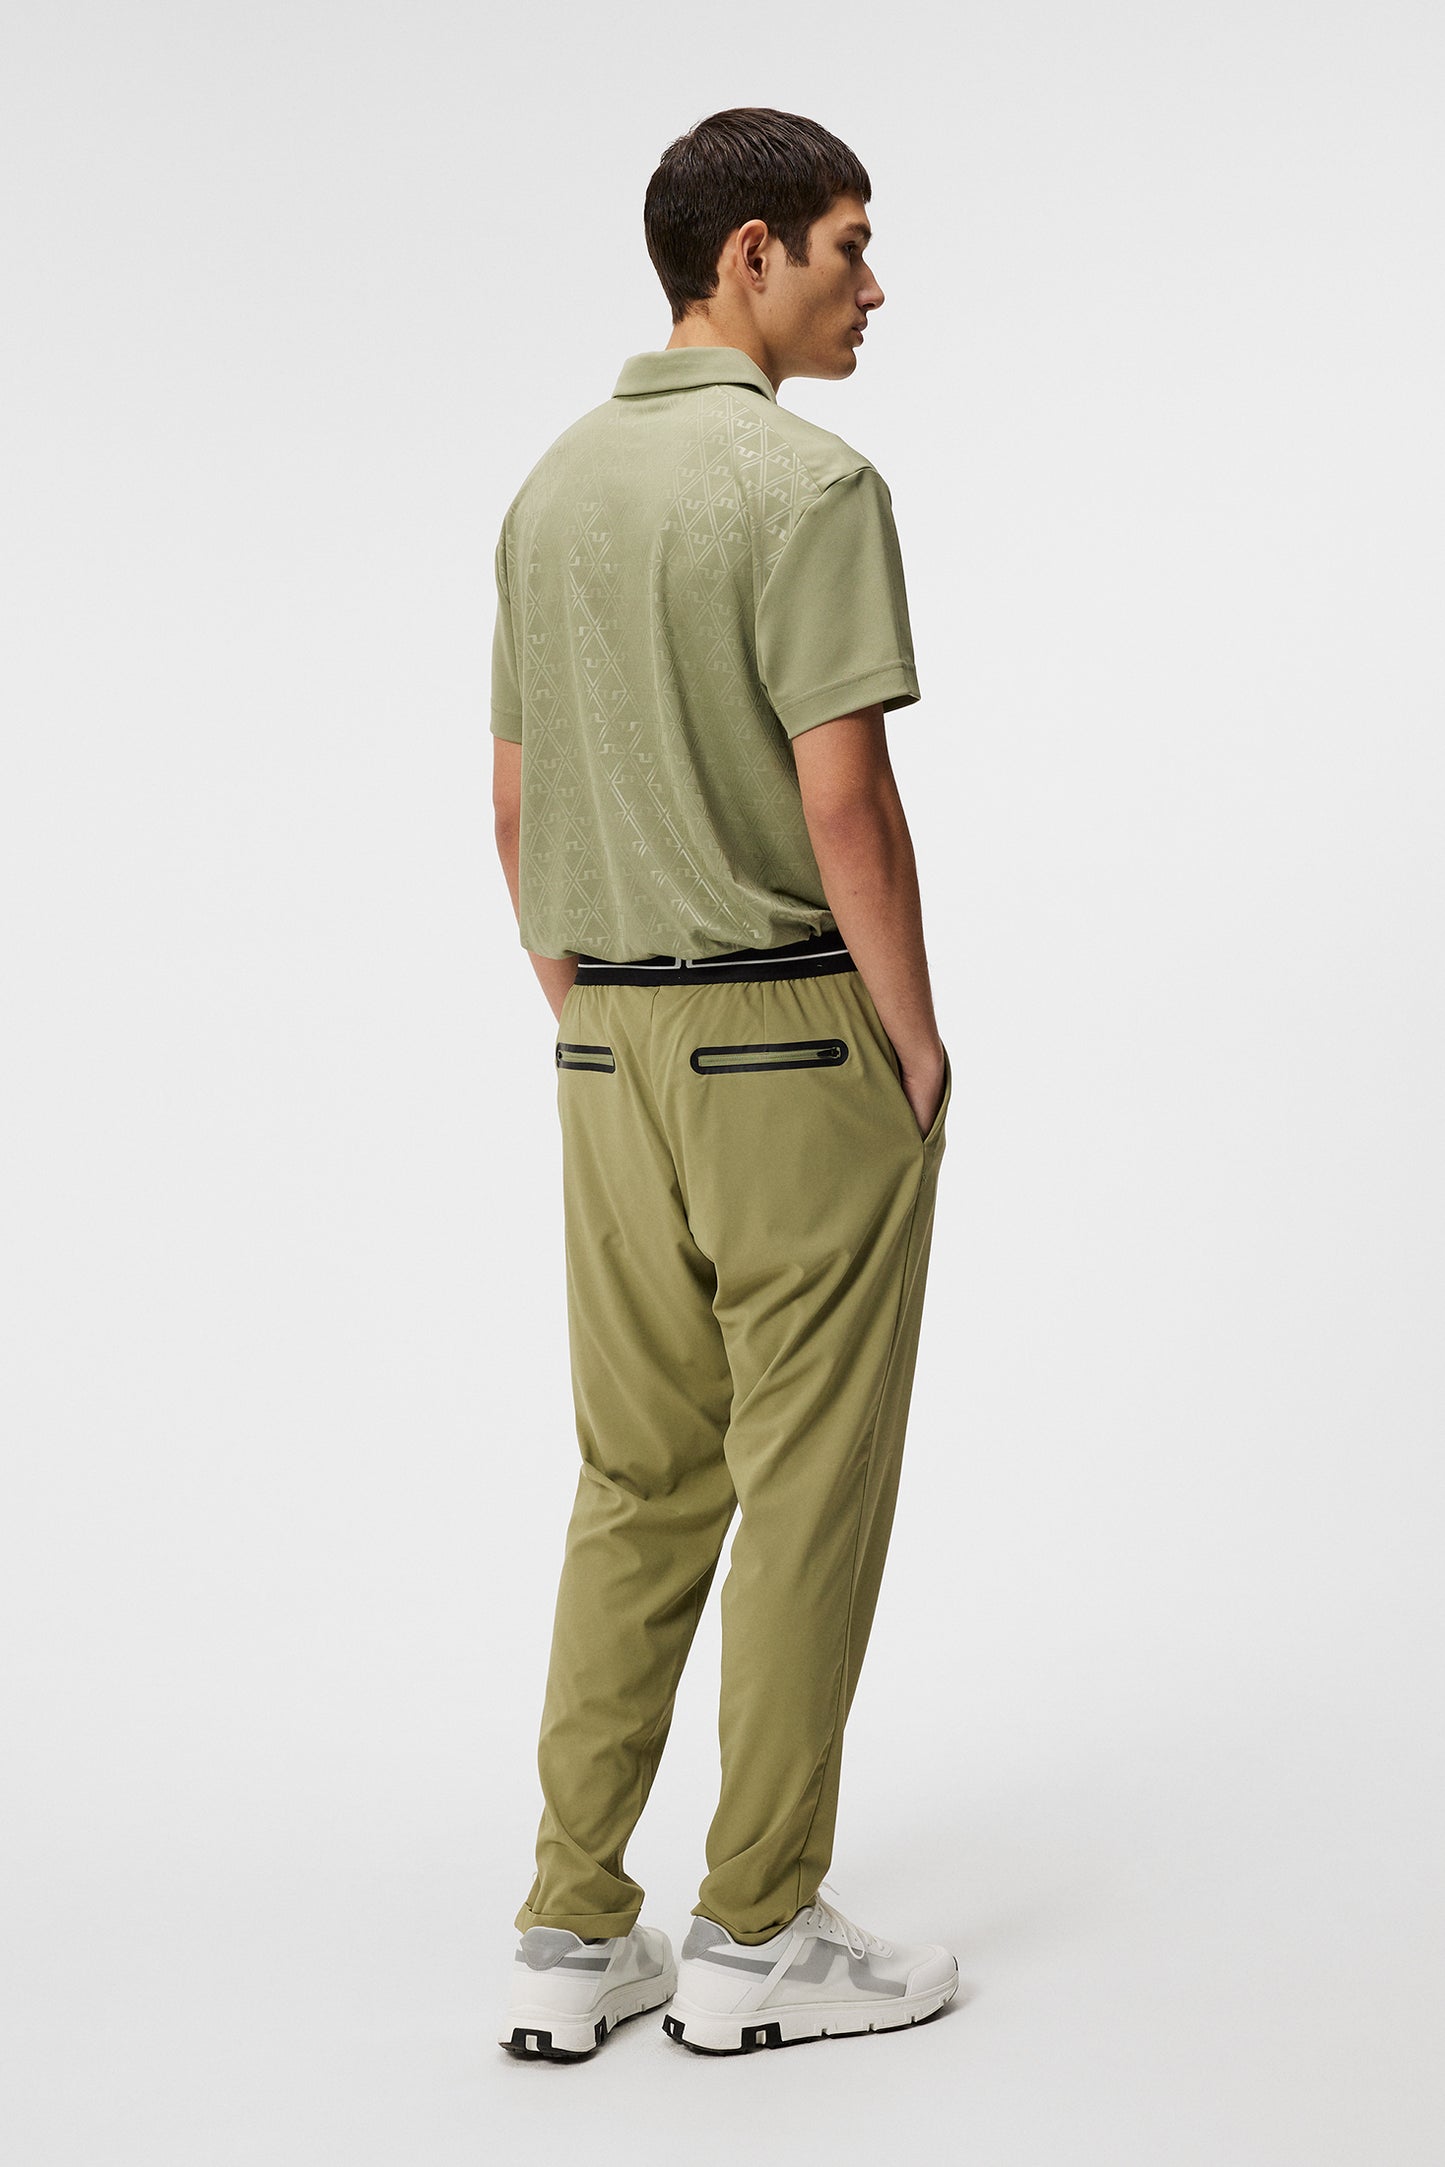 Peat Regular Fit Polo / Oil Green